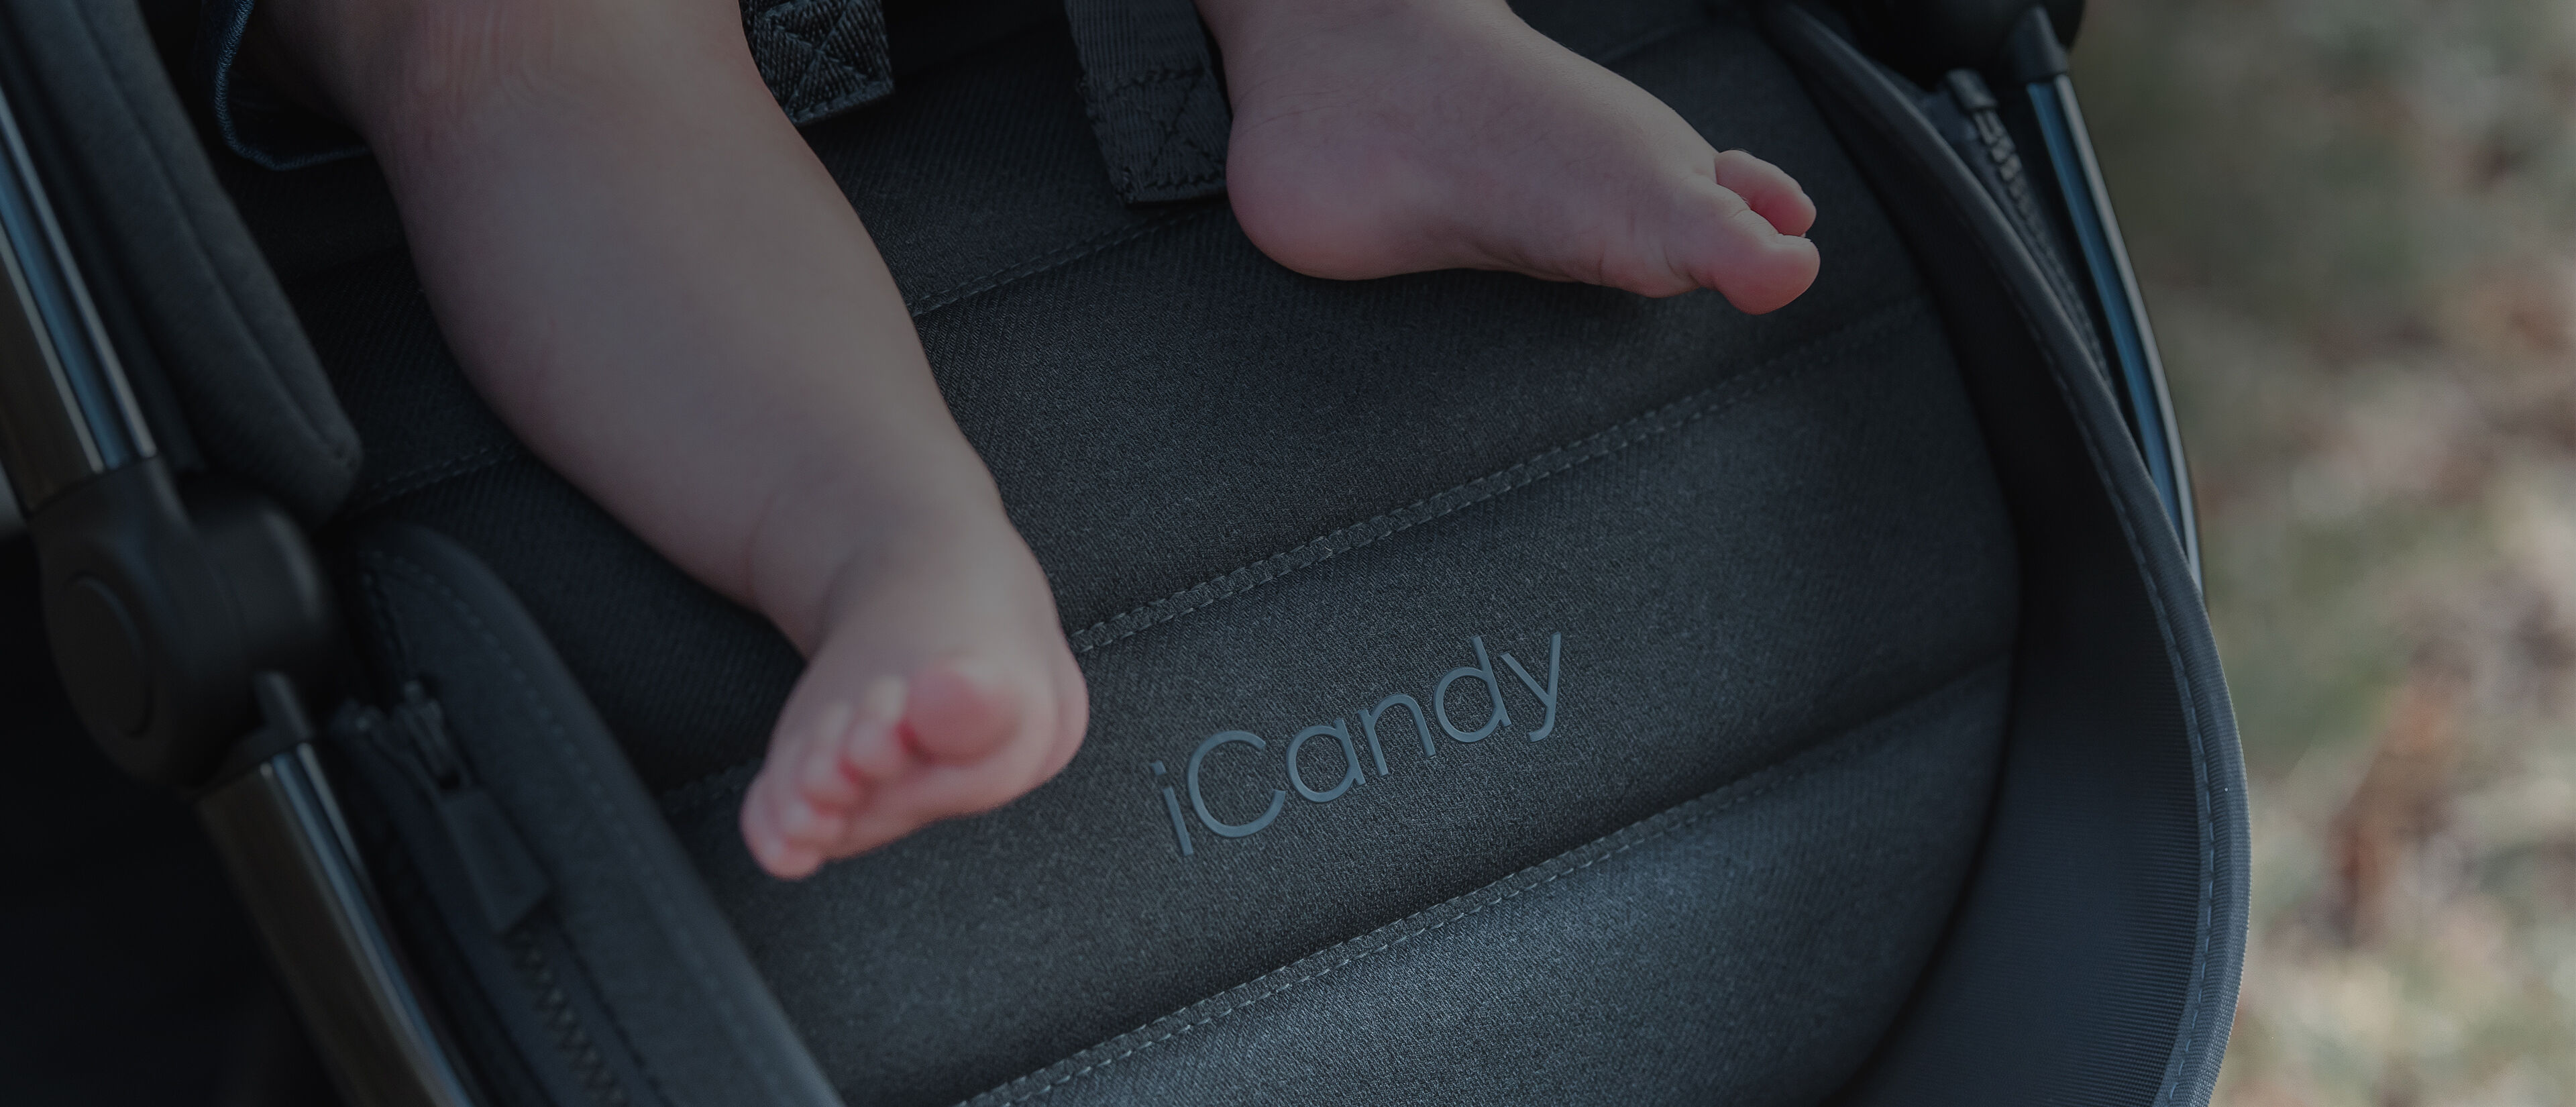 Tackling-Toddler-Sleep-Challenges-iCandy